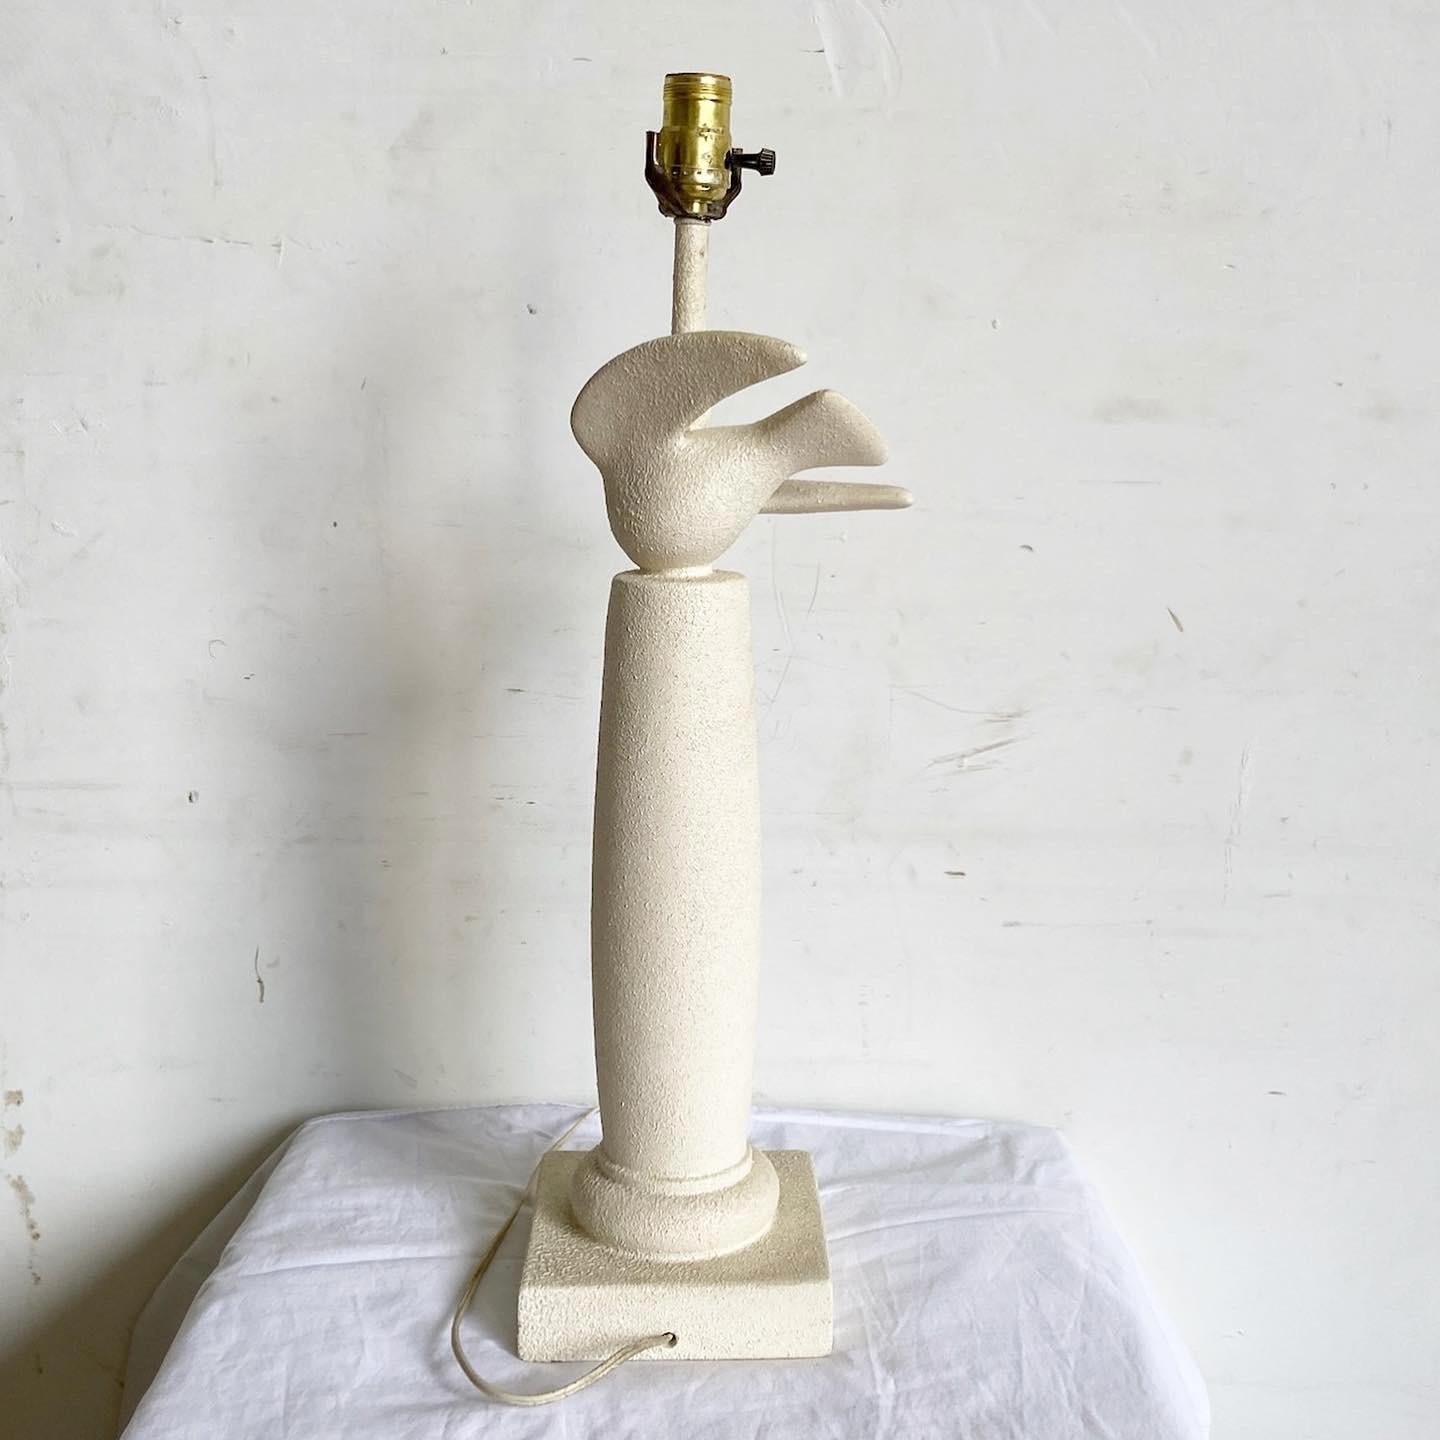 Illuminate your space with the elegance of the Dove Sculpted Postmodern Lamp. Featuring a textured plaster body, its highlight is a gracefully sculpted dove, symbolizing peace, taking flight. The minimalist form combined with the bird's intricate